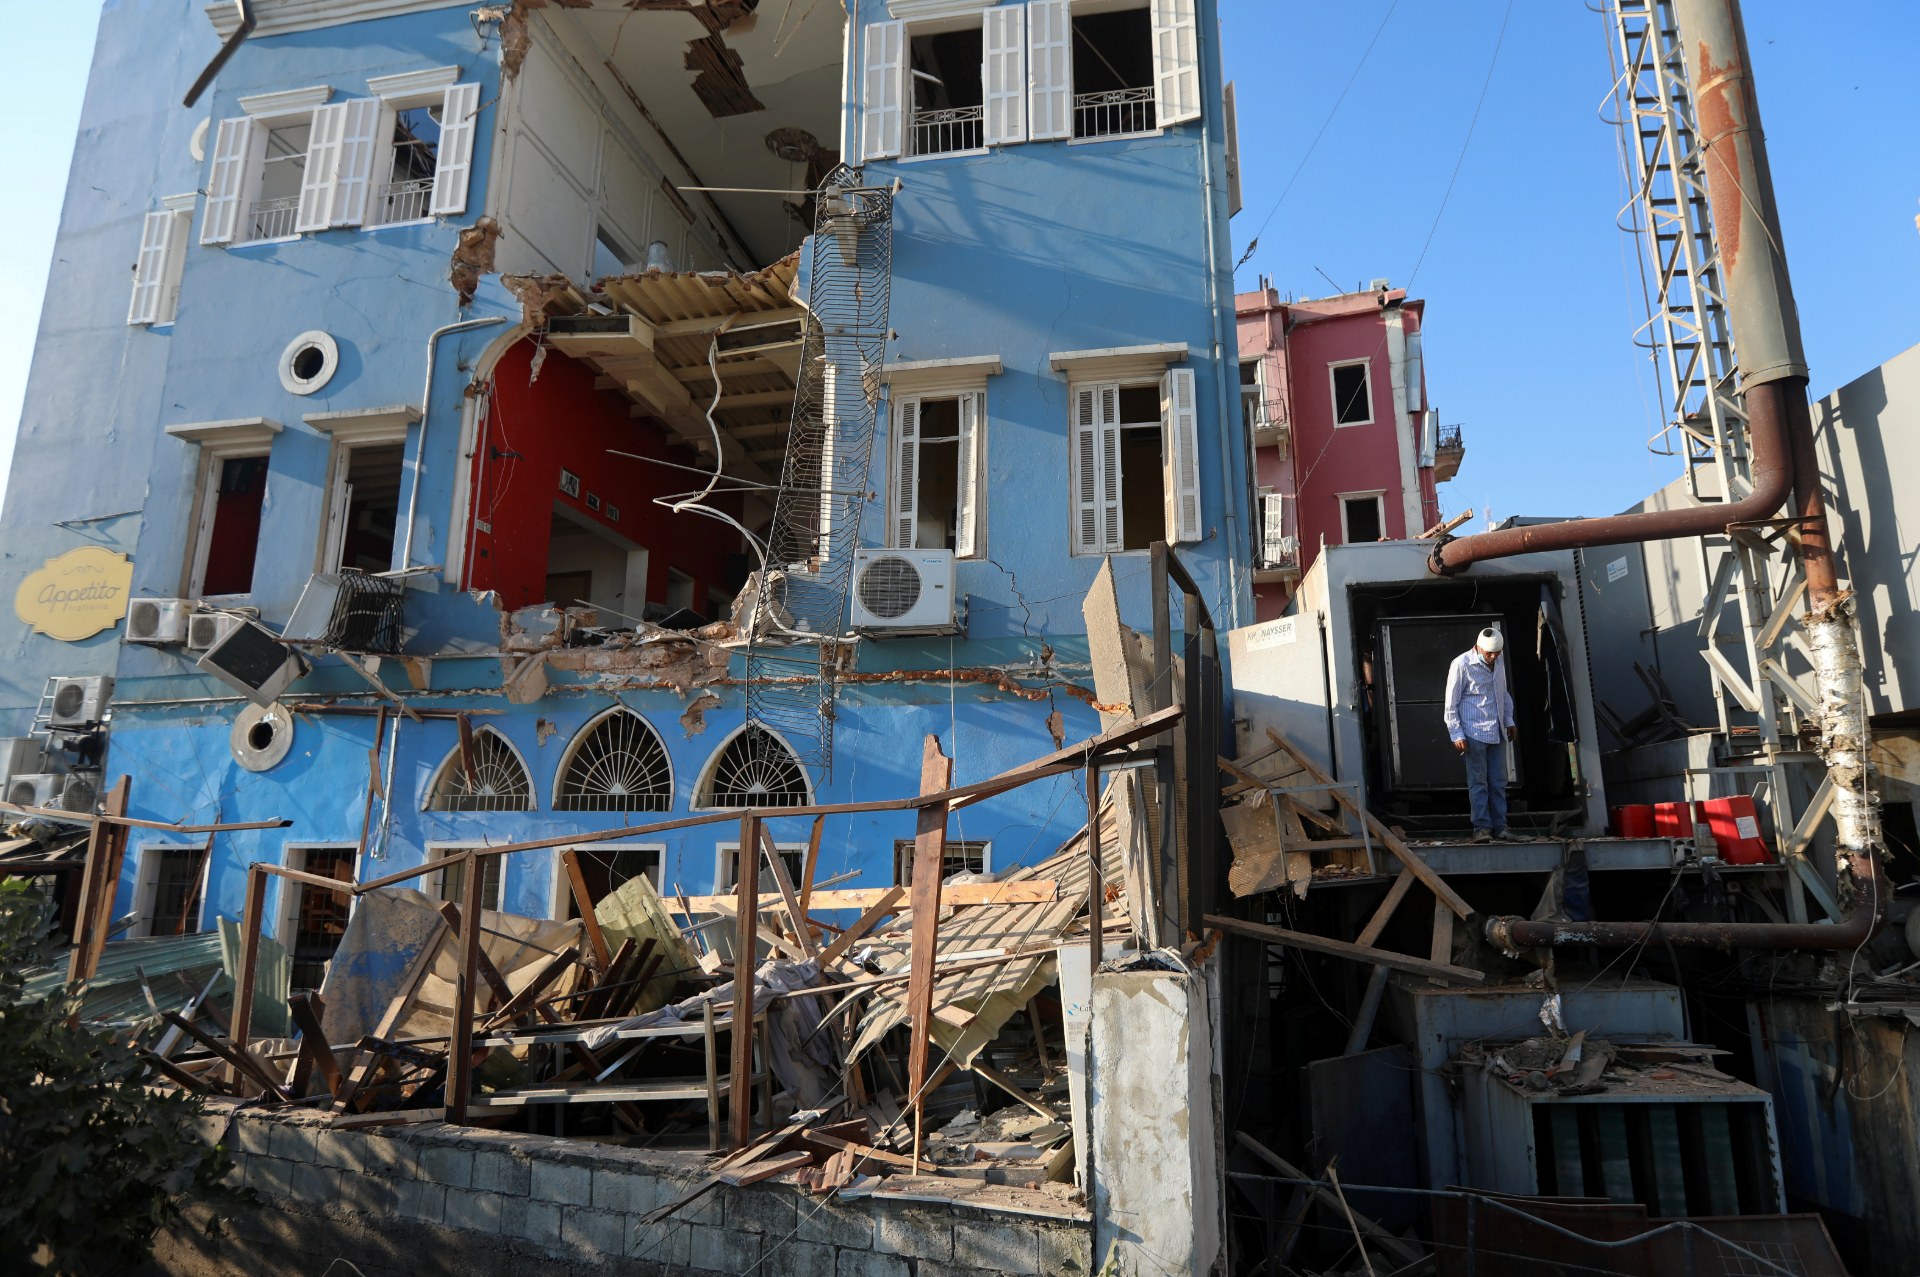 A man inspects the damage following Tuesday's blast in Beirut's port area (Reuters)